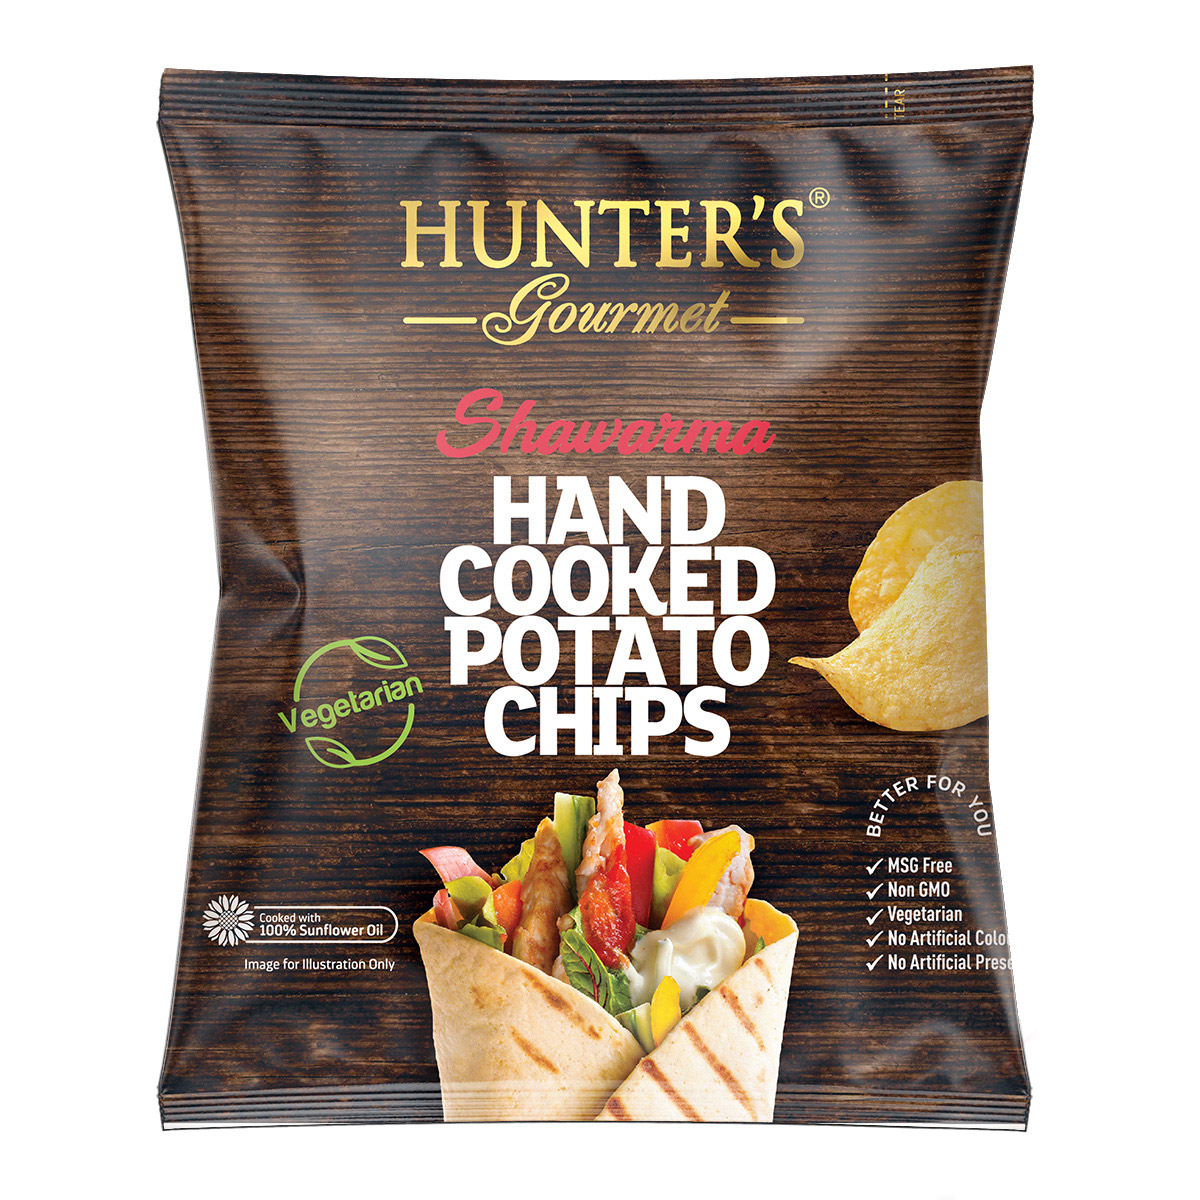 Hunter’s Gourmet Hand Cooked Potato Chips – Shakshuka – Middle Eastern Flavours (25gm)